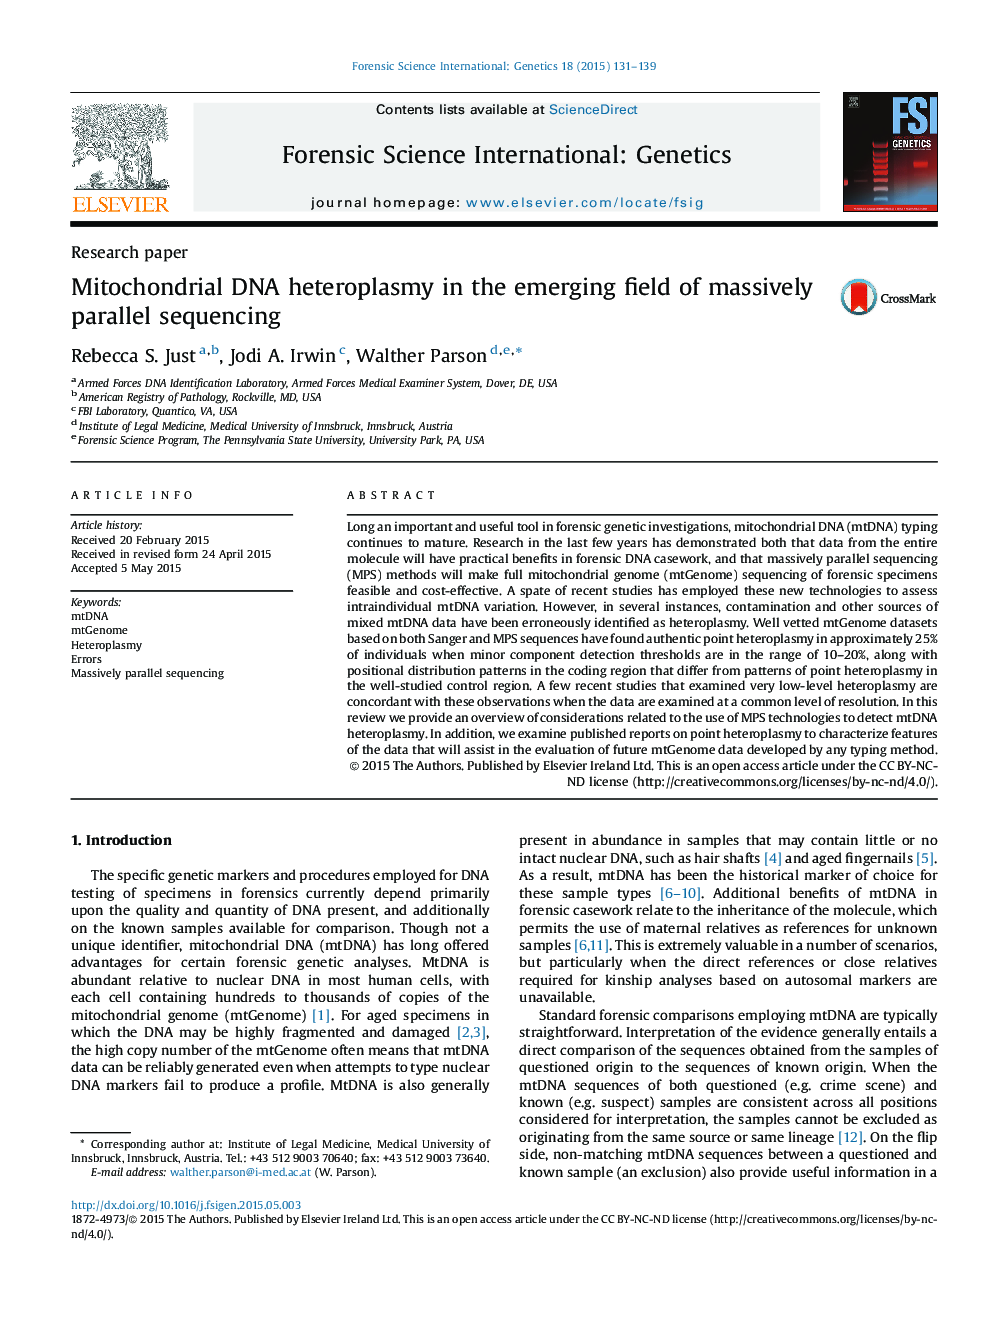 Mitochondrial DNA heteroplasmy in the emerging field of massively parallel sequencing